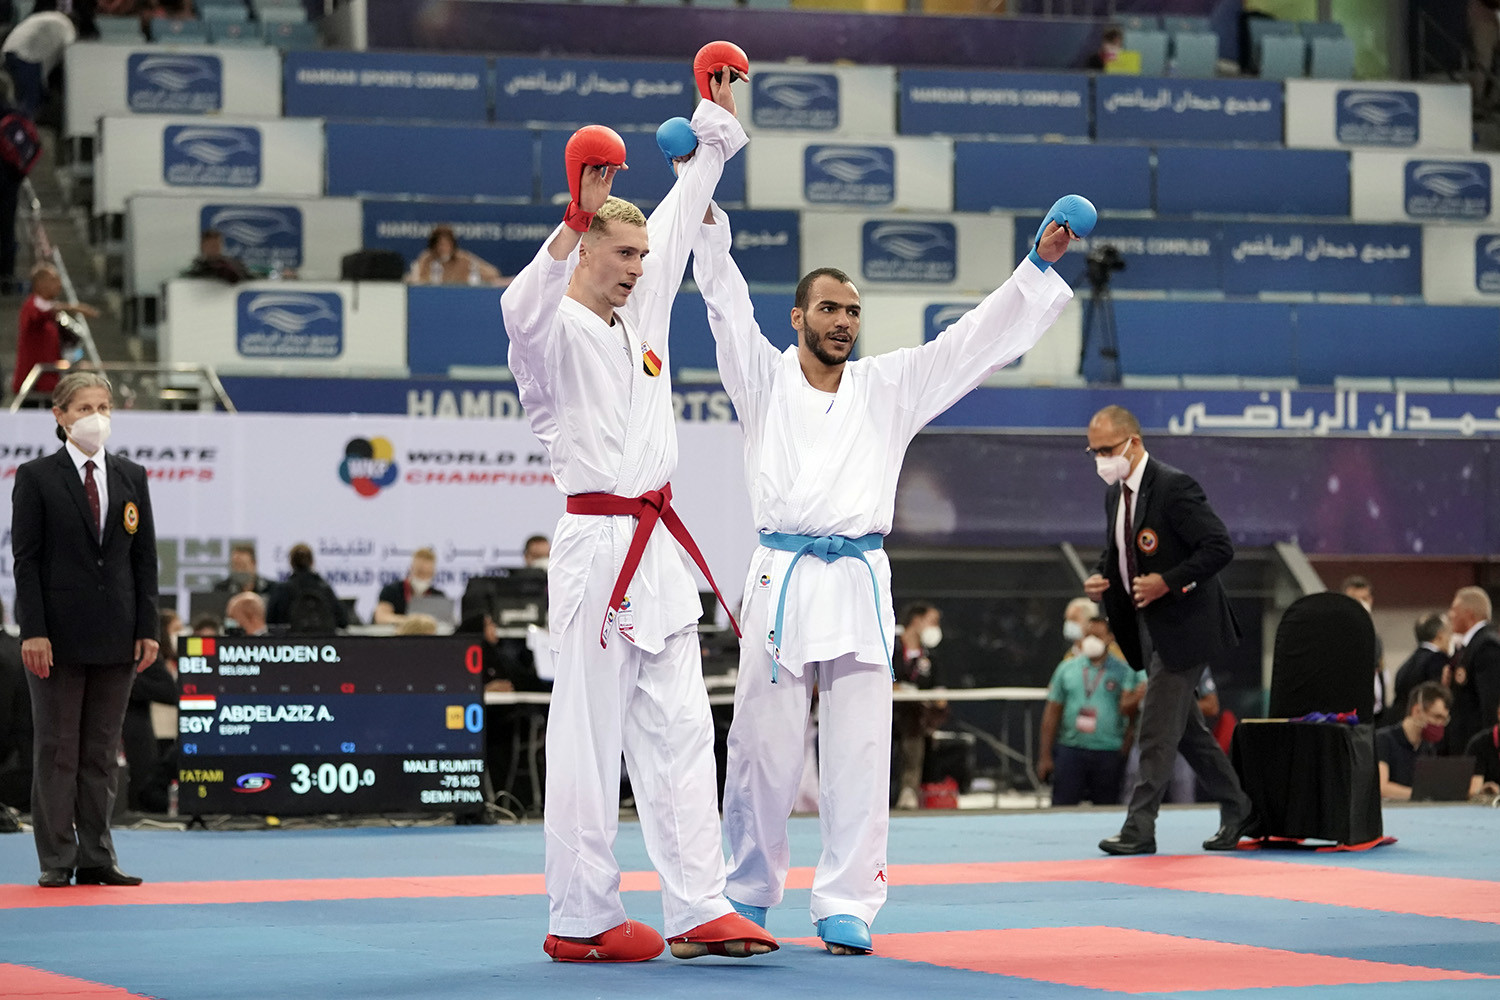 Karate's values were on show throughout the first day of action in Dubai ©WKF